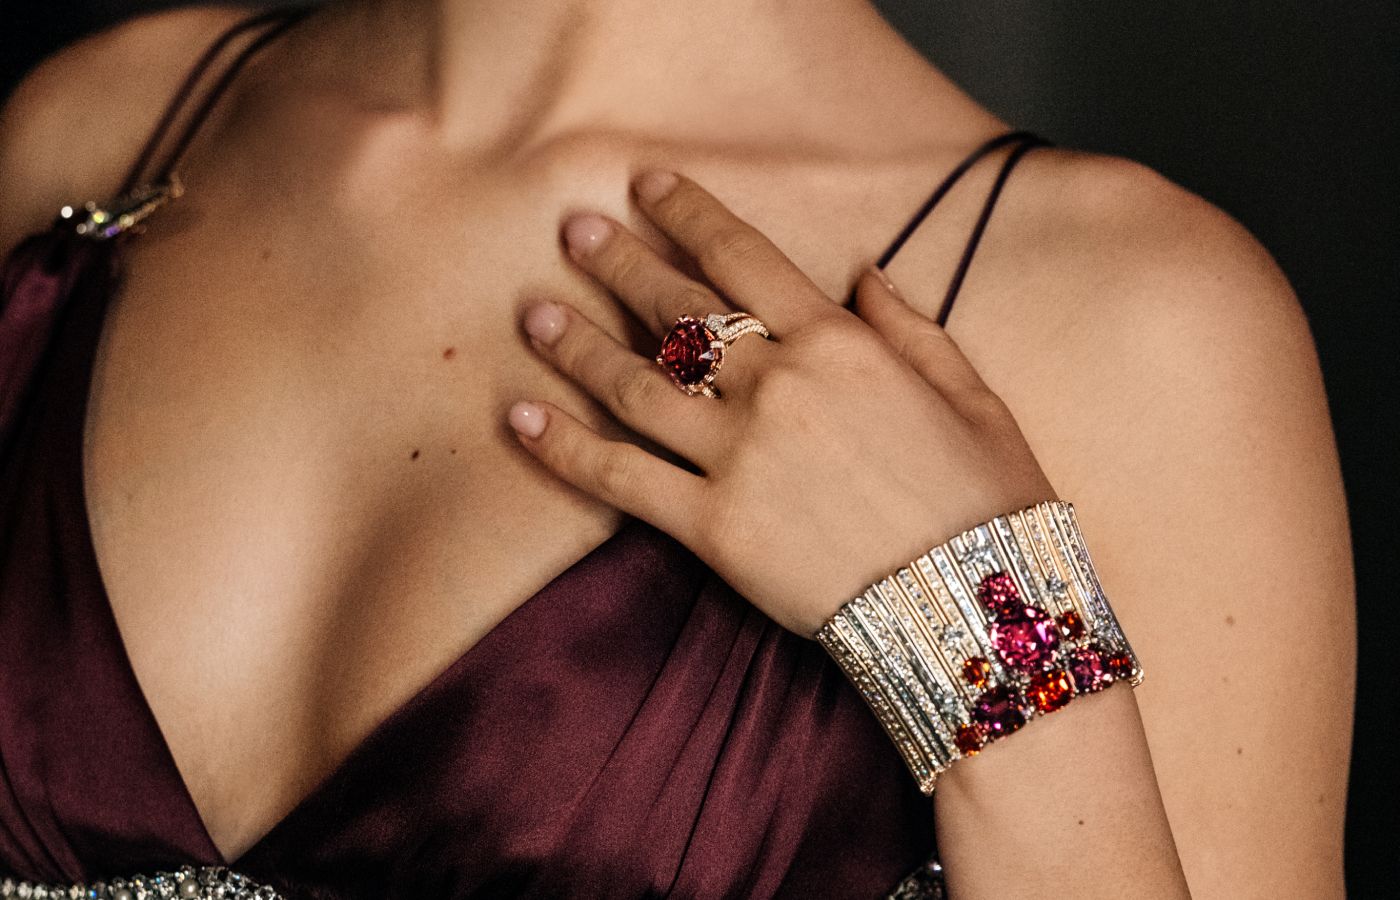 IN PICS: Deep Time from Louis Vuitton - Professional Jeweler USA